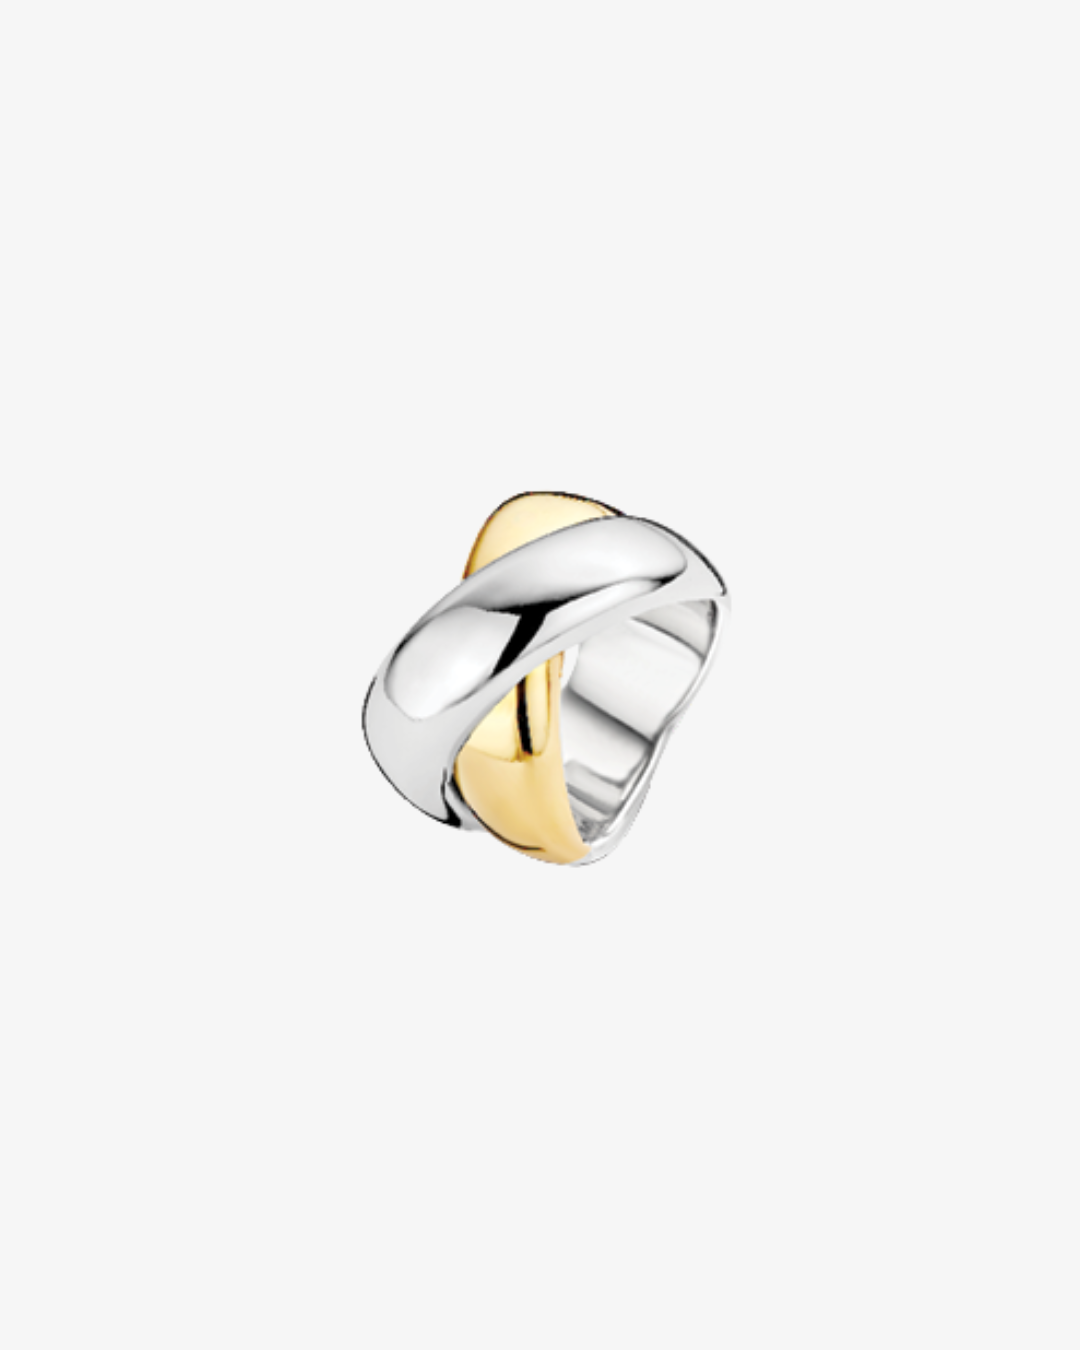 Twisted Ring in Silver and Gold - TM1072 – Julieta Jóias